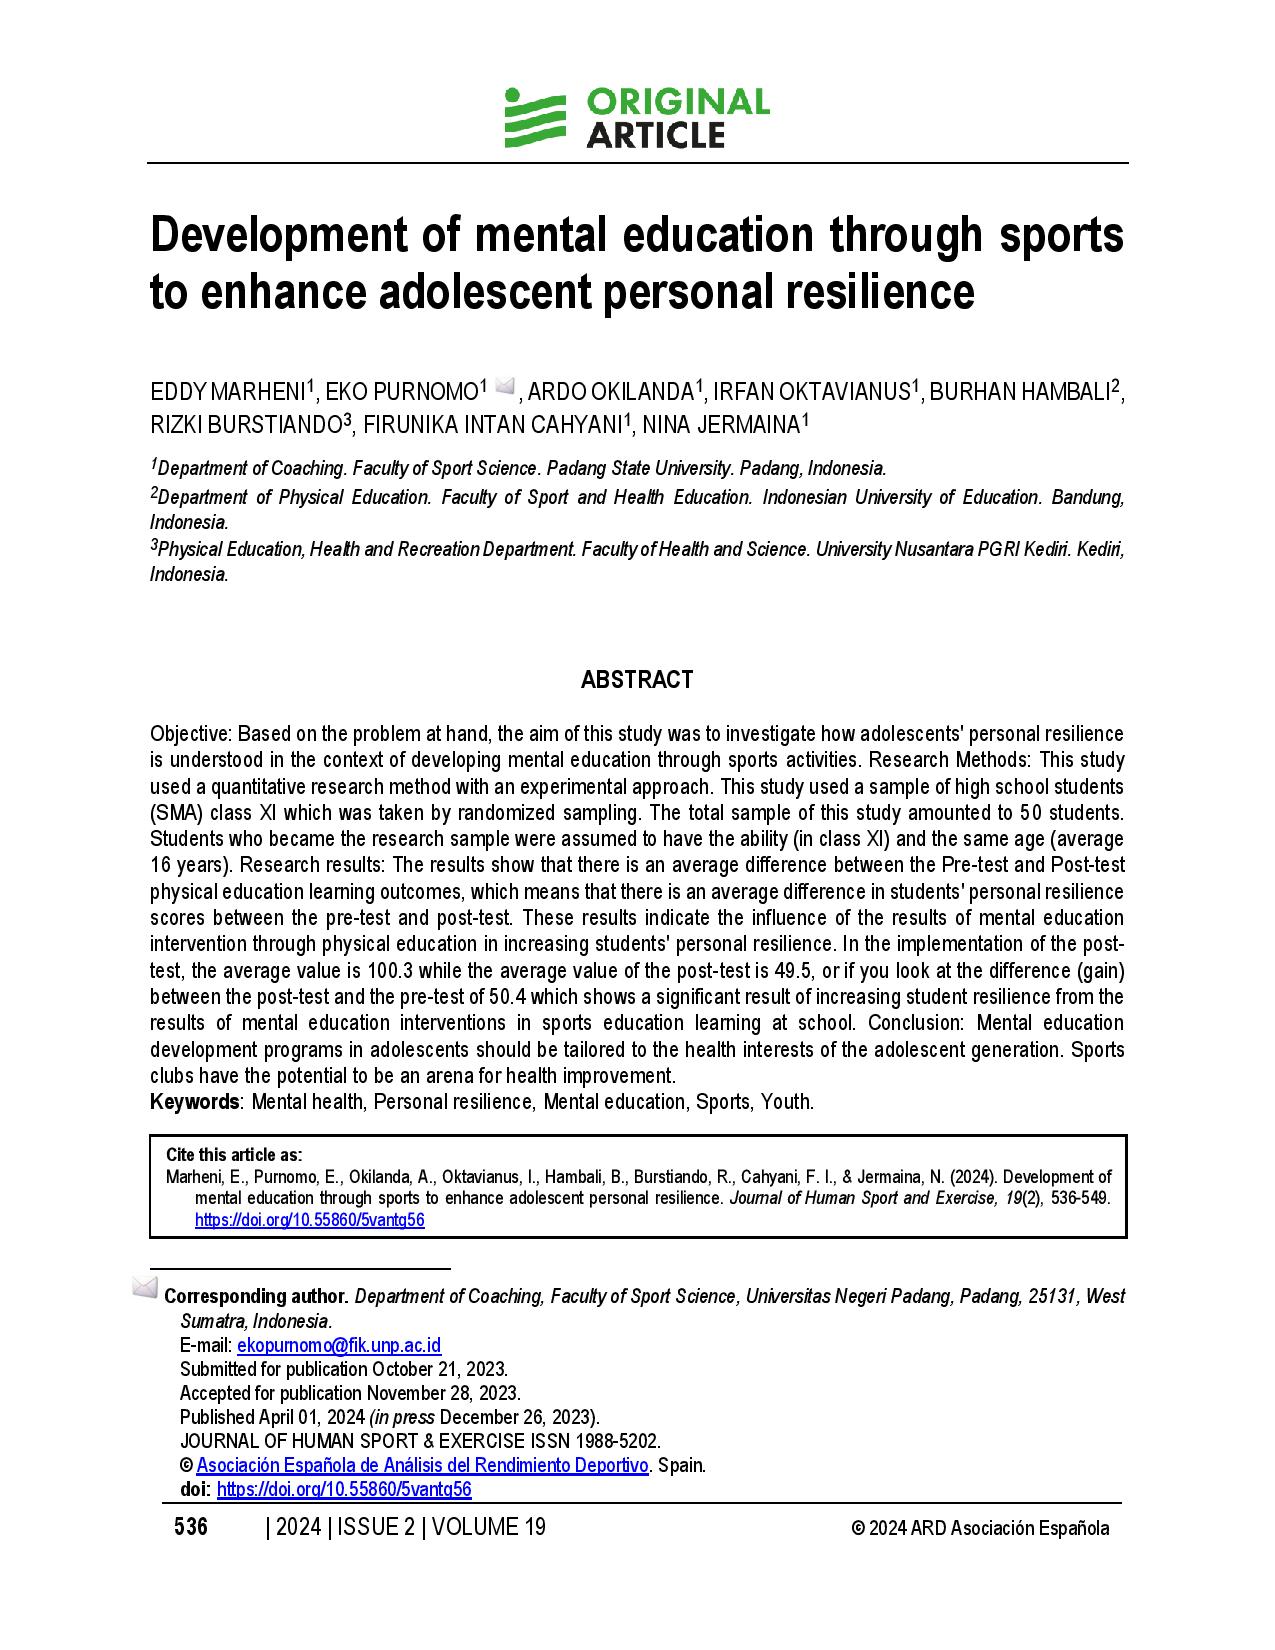 Development of mental education through sports to enhance adolescent personal resilience